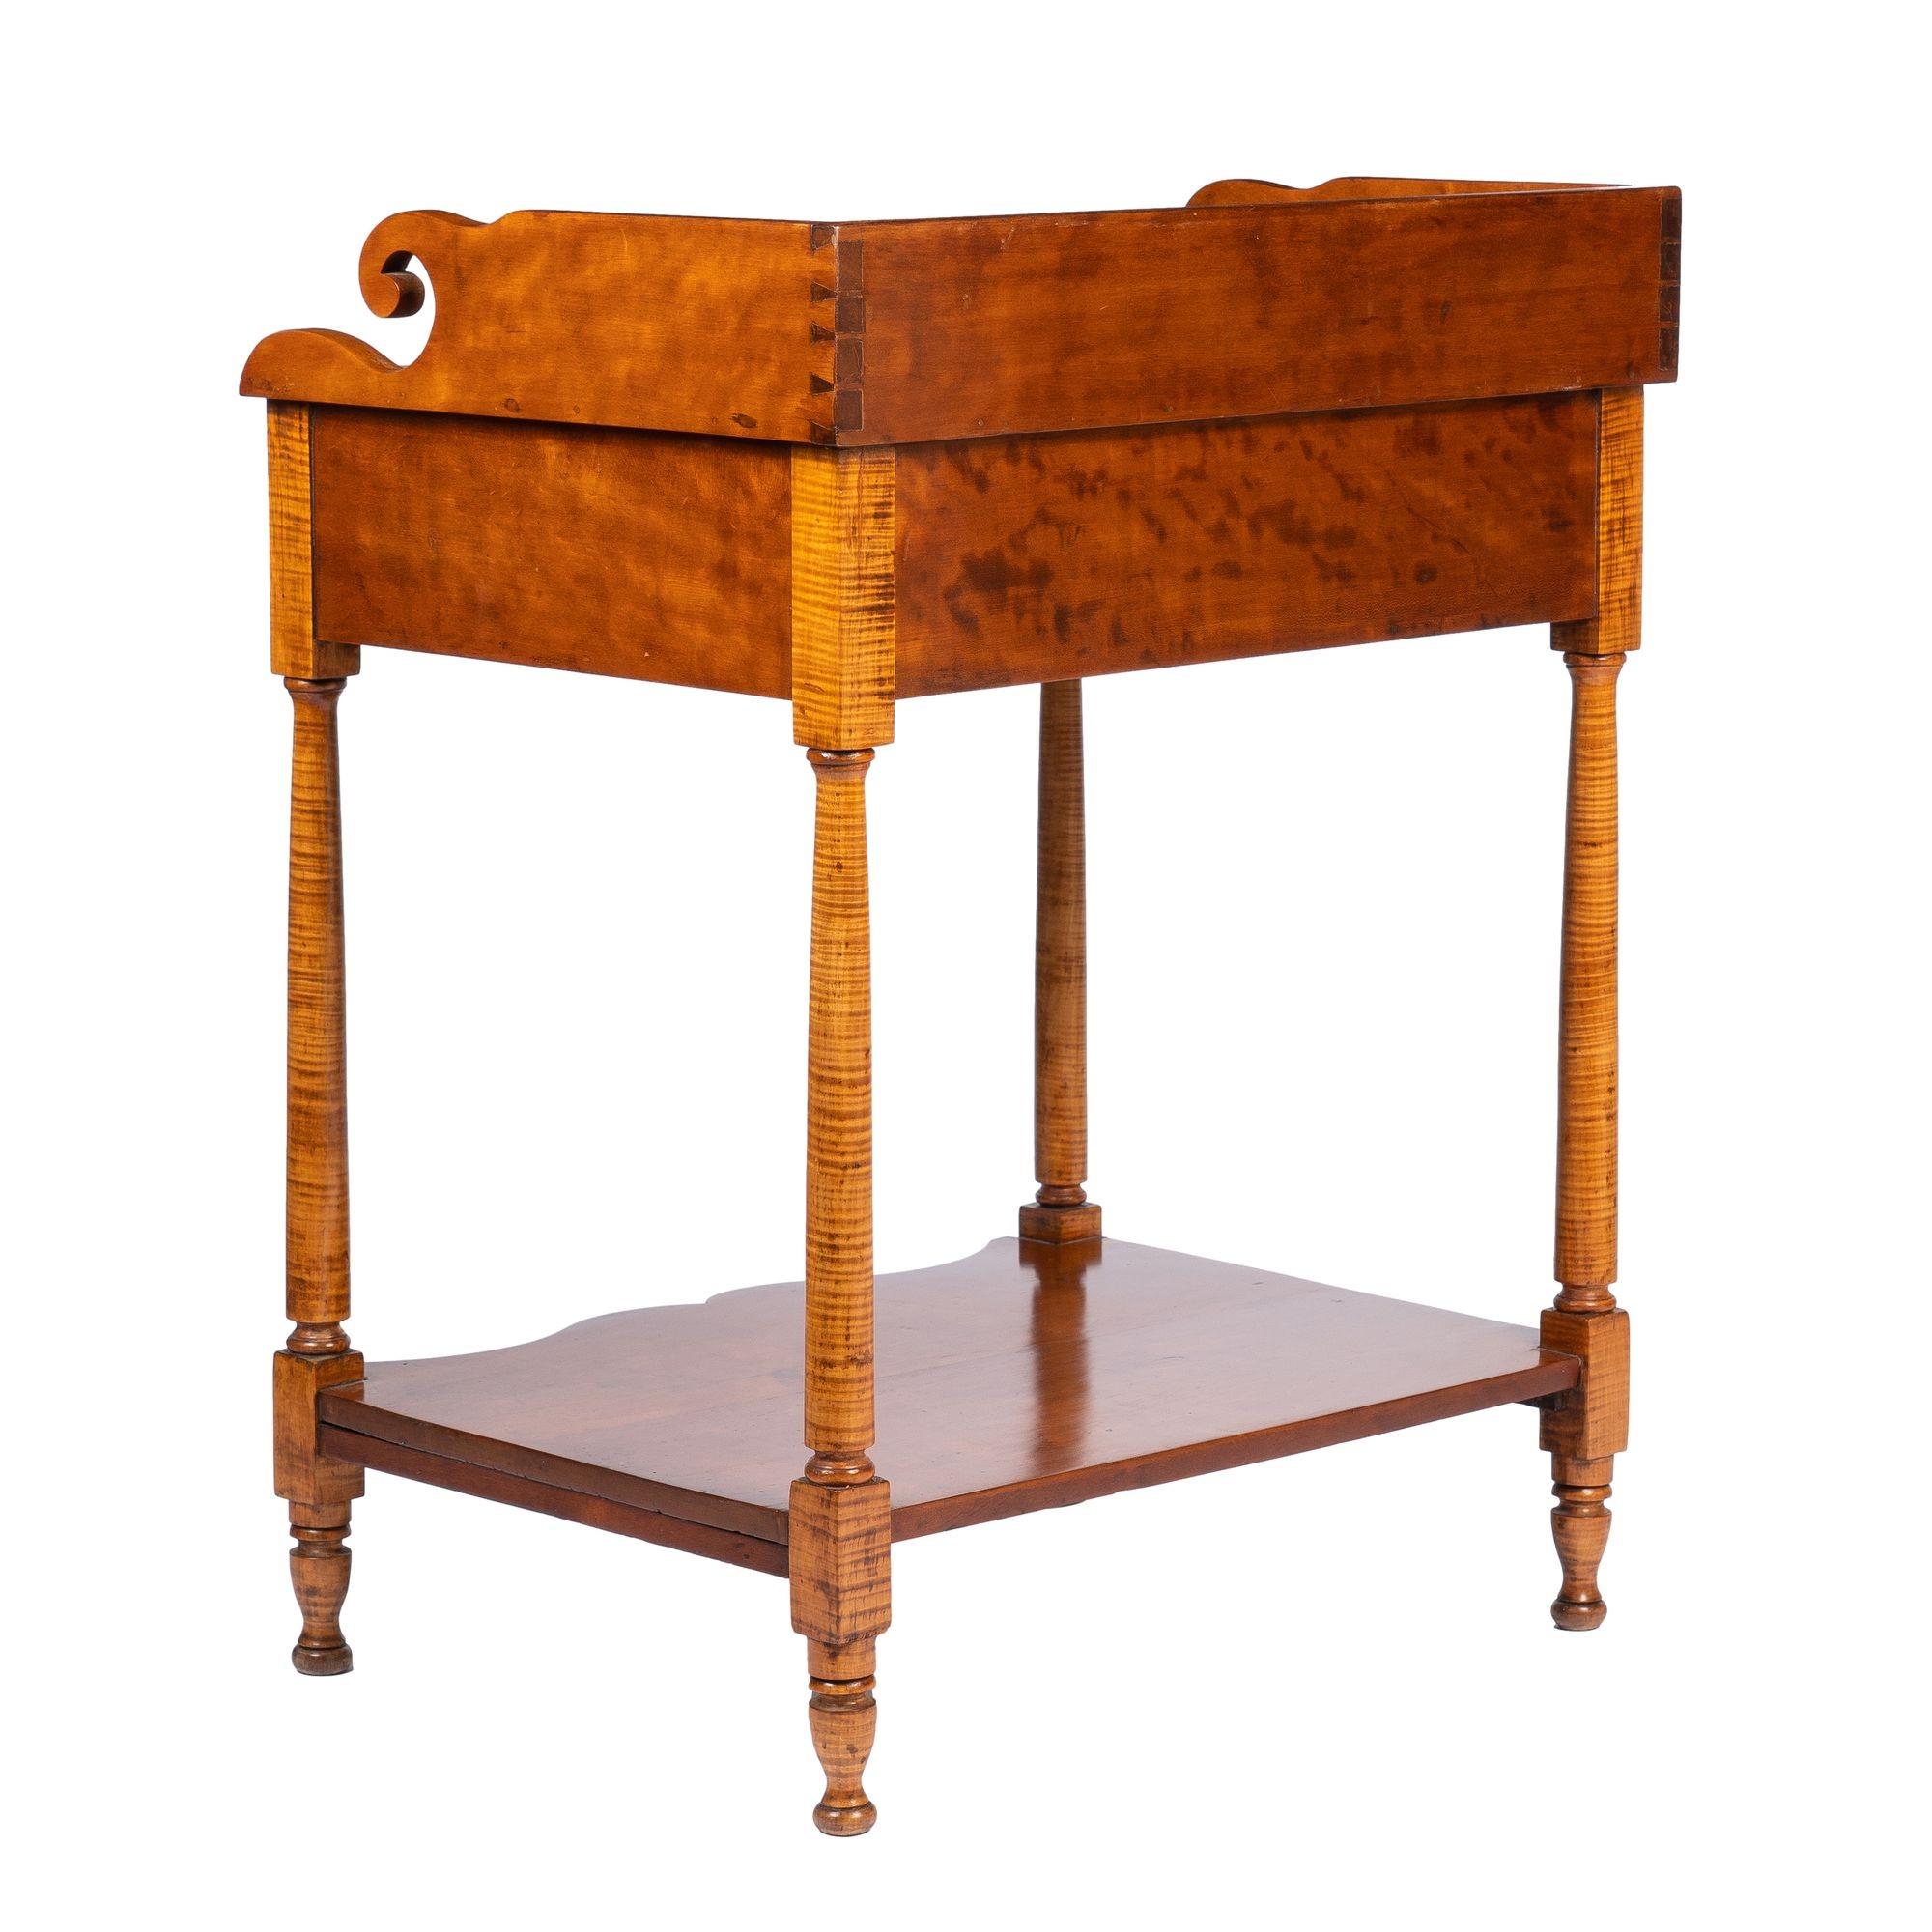 American Philadelphia Cherry Wood Stand with Splash on a Conforming Apron, 1820 For Sale